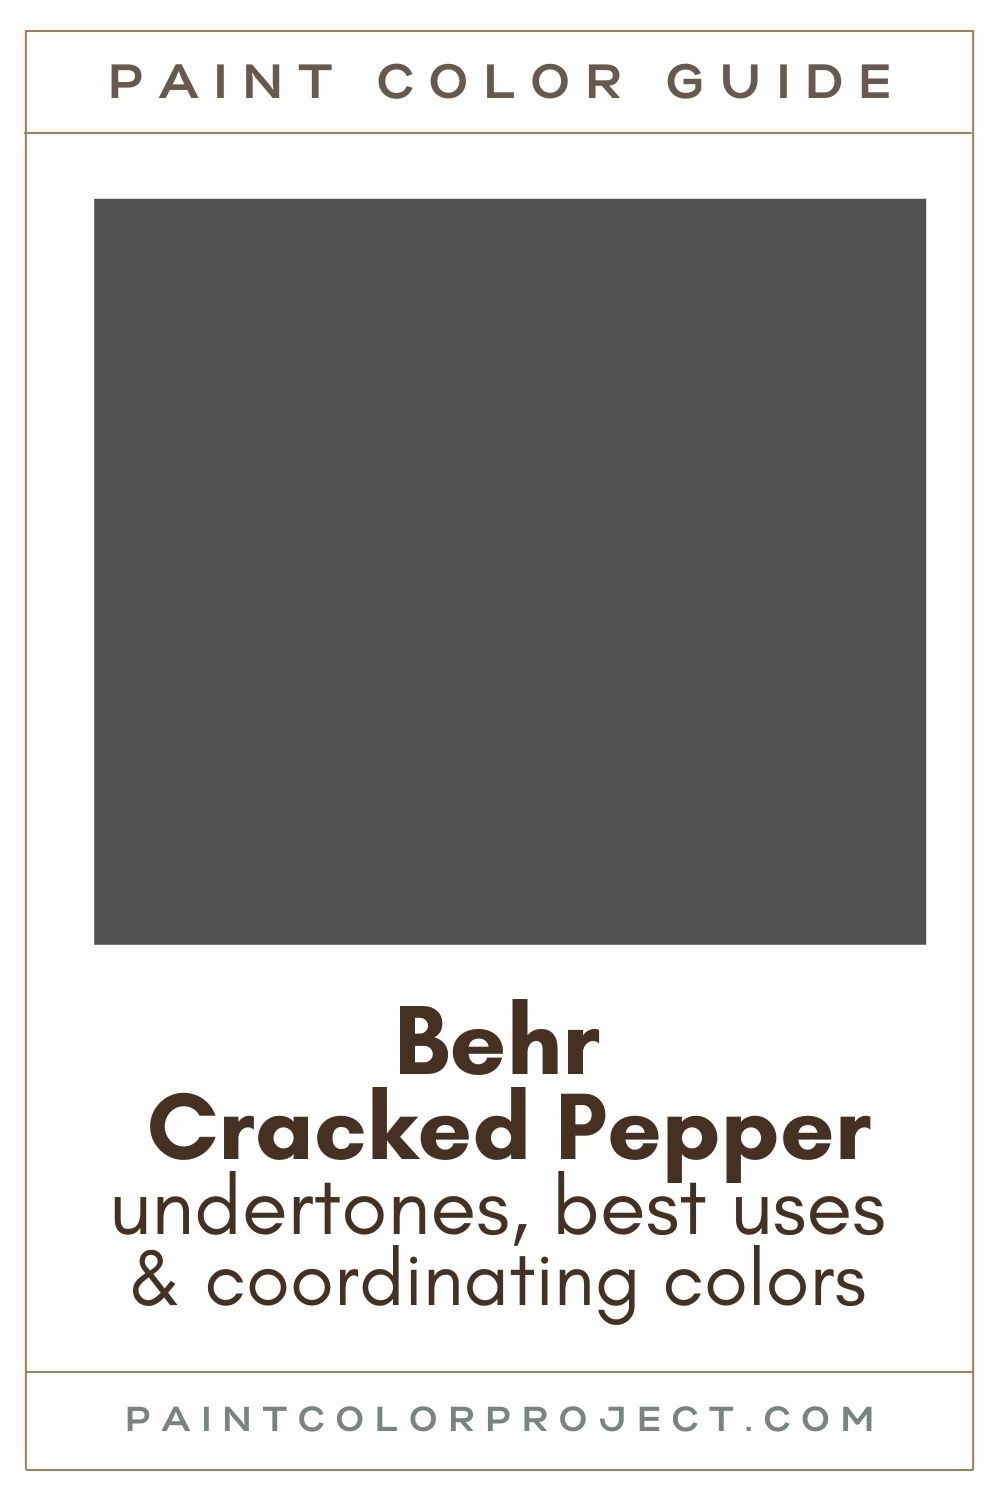 Behr Cracked Pepper: a complete color review - The Paint Color Project